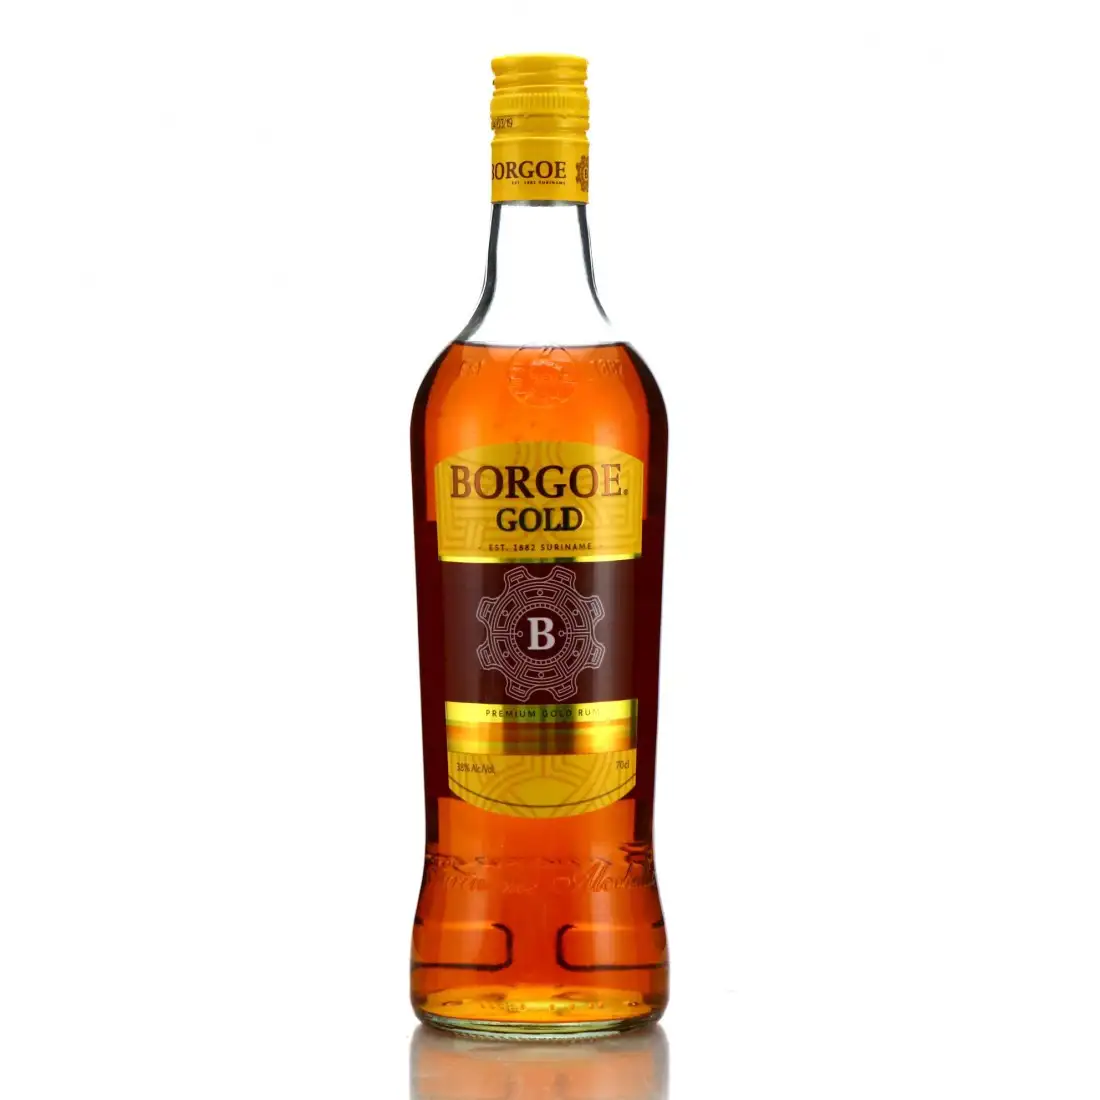 Image of the front of the bottle of the rum Borgoe Gold